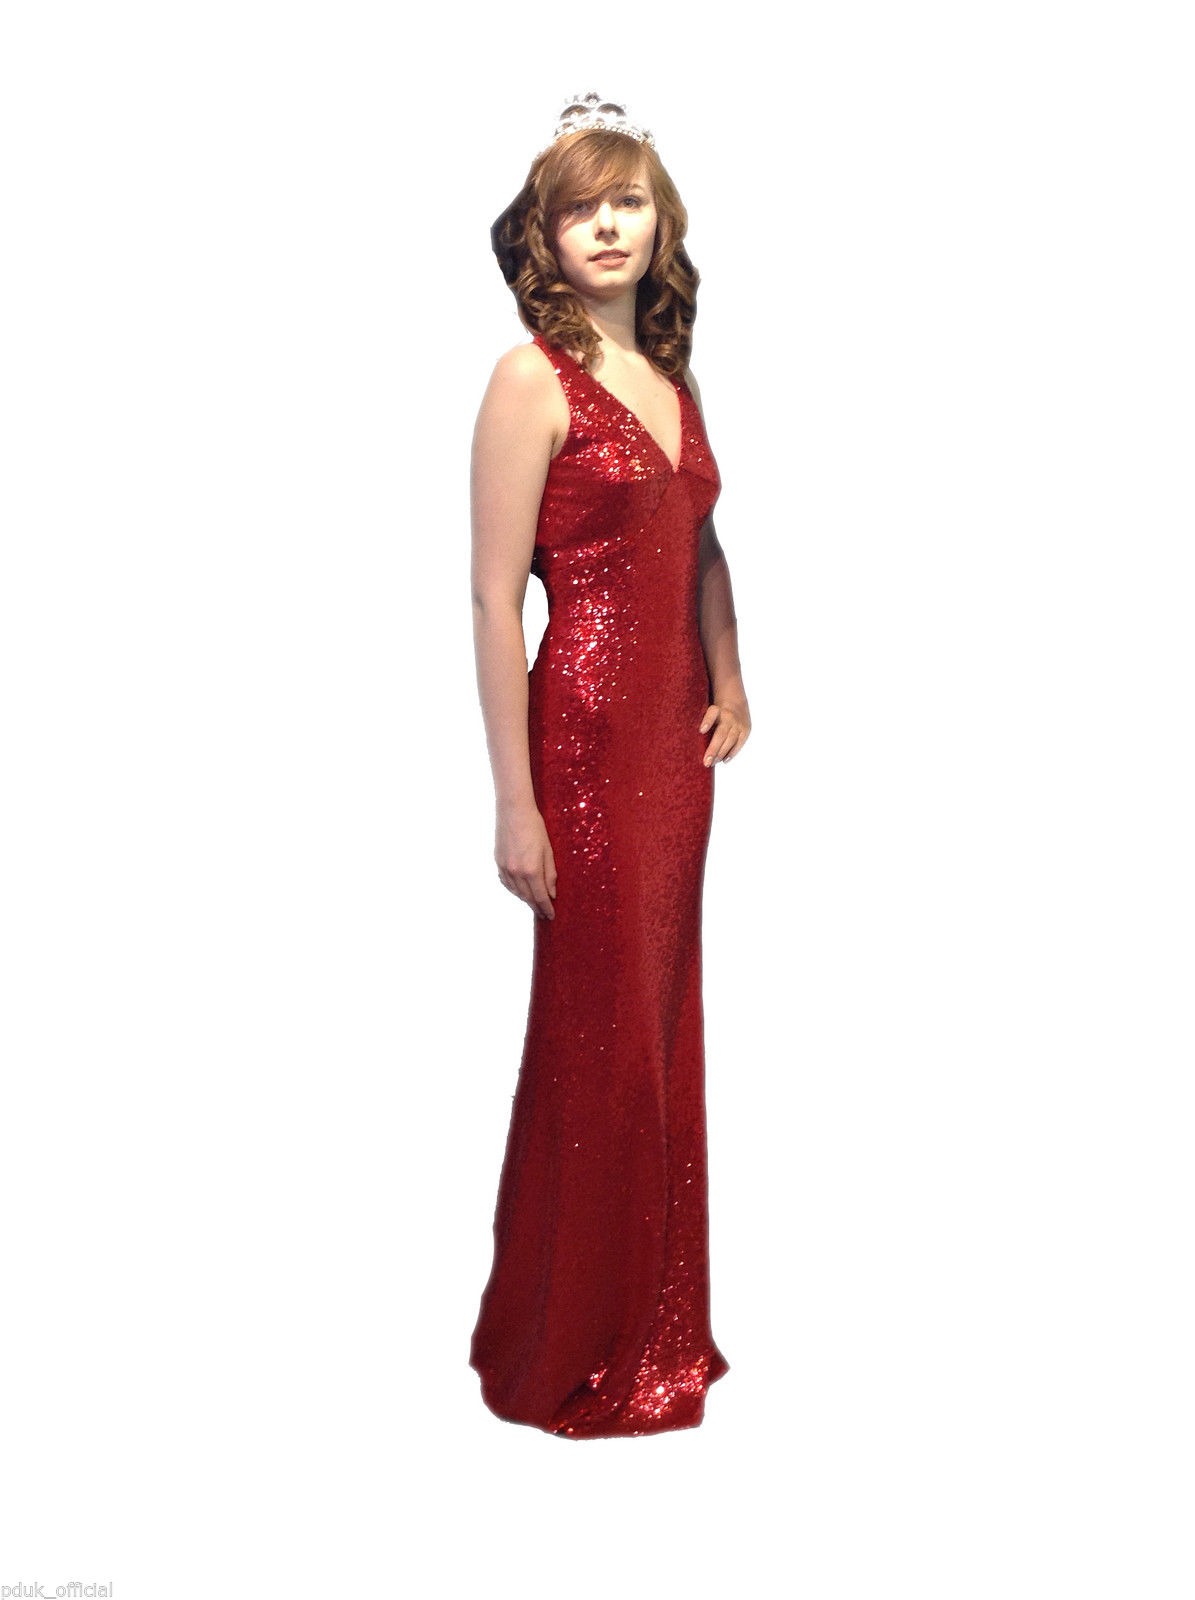 red sequin fishtail dress